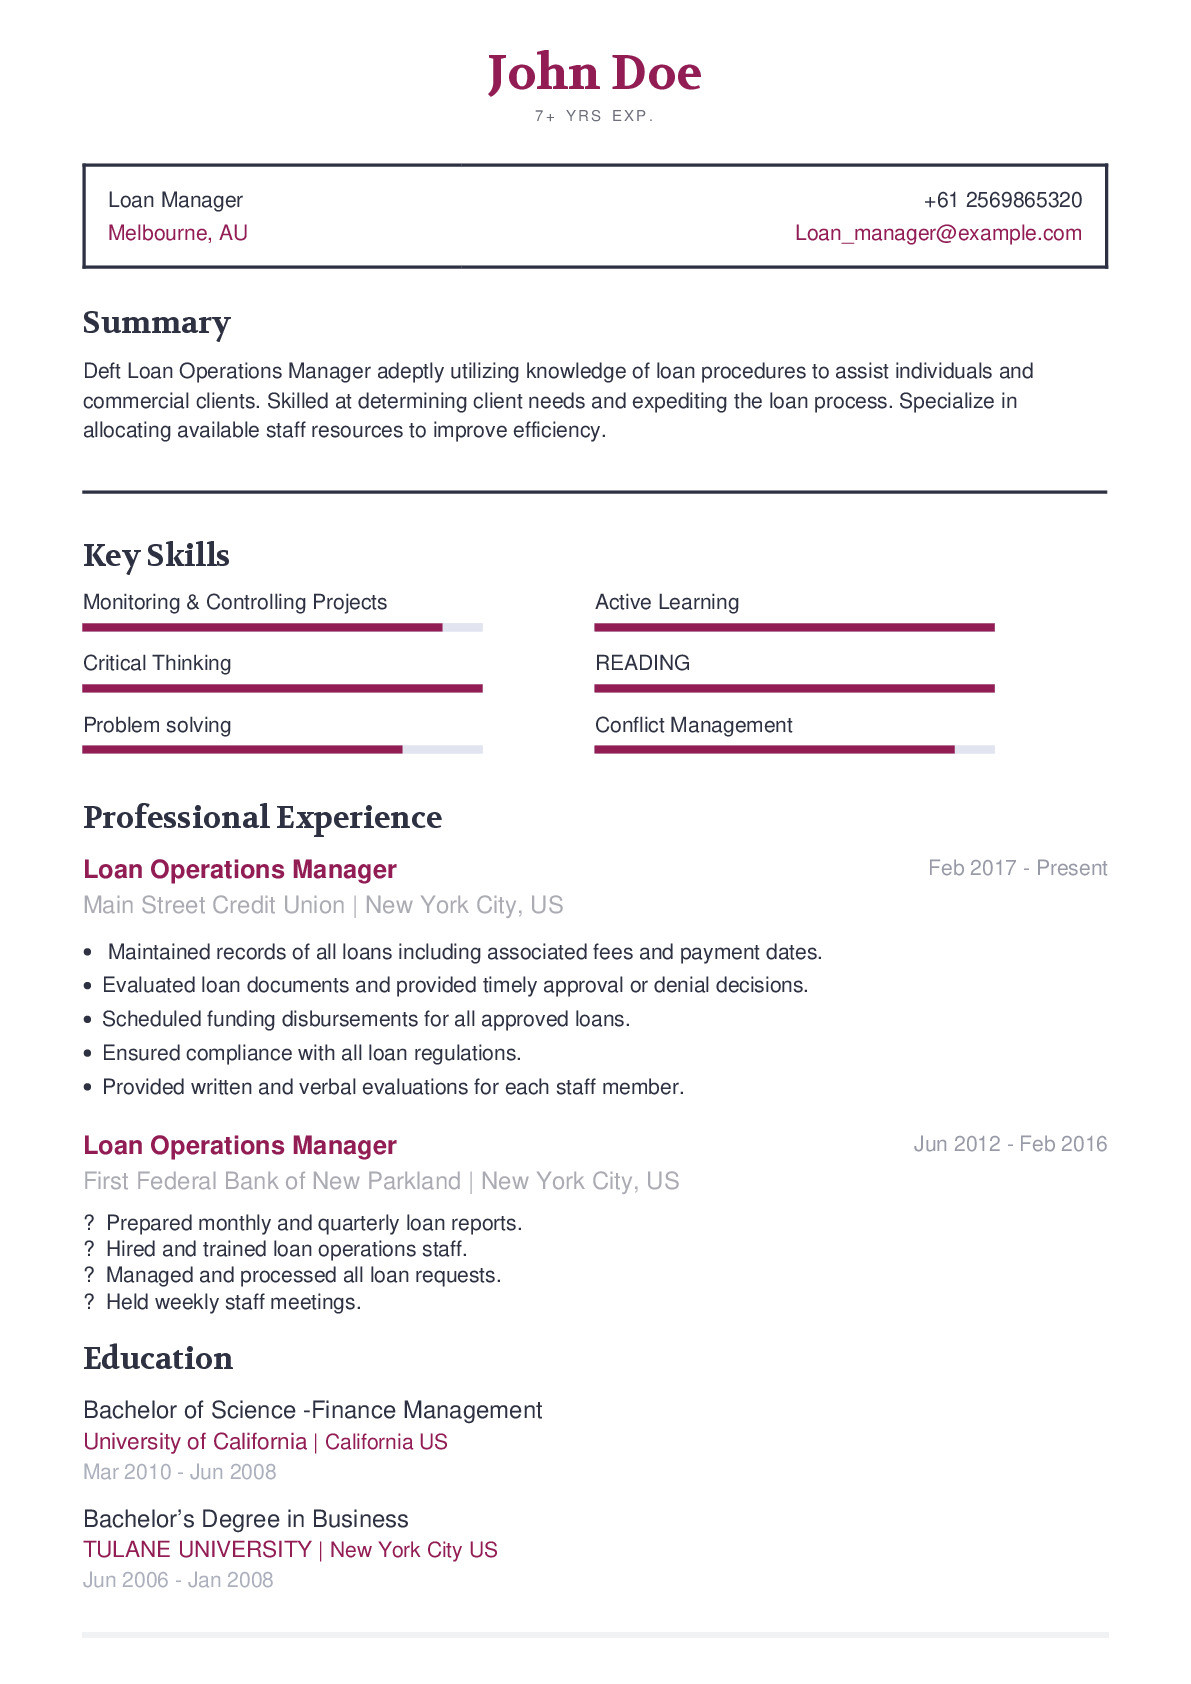 Vp Of Loan Operations Resume Sample Loan Manager Resume Example with Content Sample Craftmycv